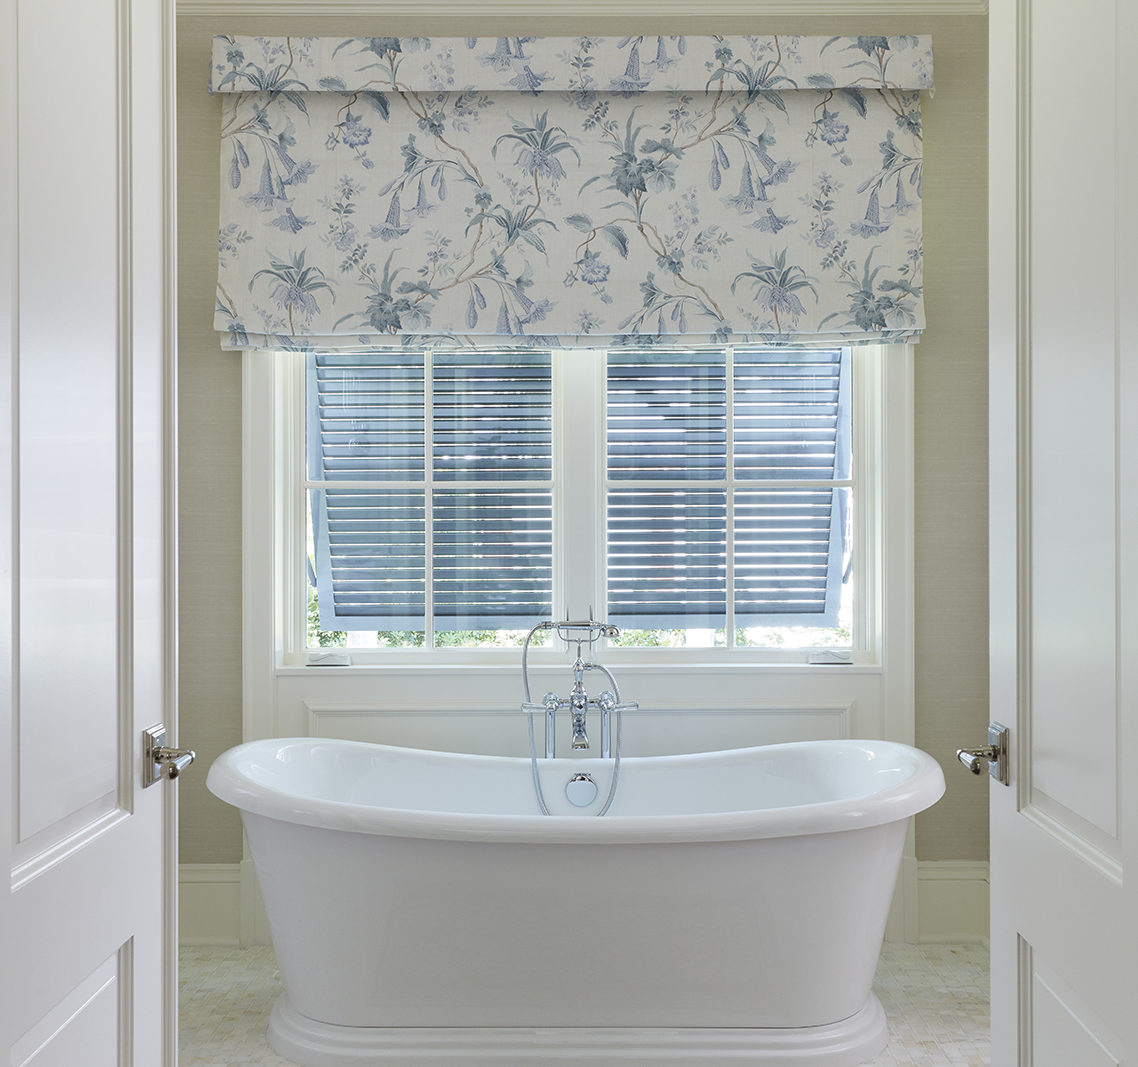 The transitional—trending toward traditional—master bathroom is anchored by a deep soaking Kohler tub